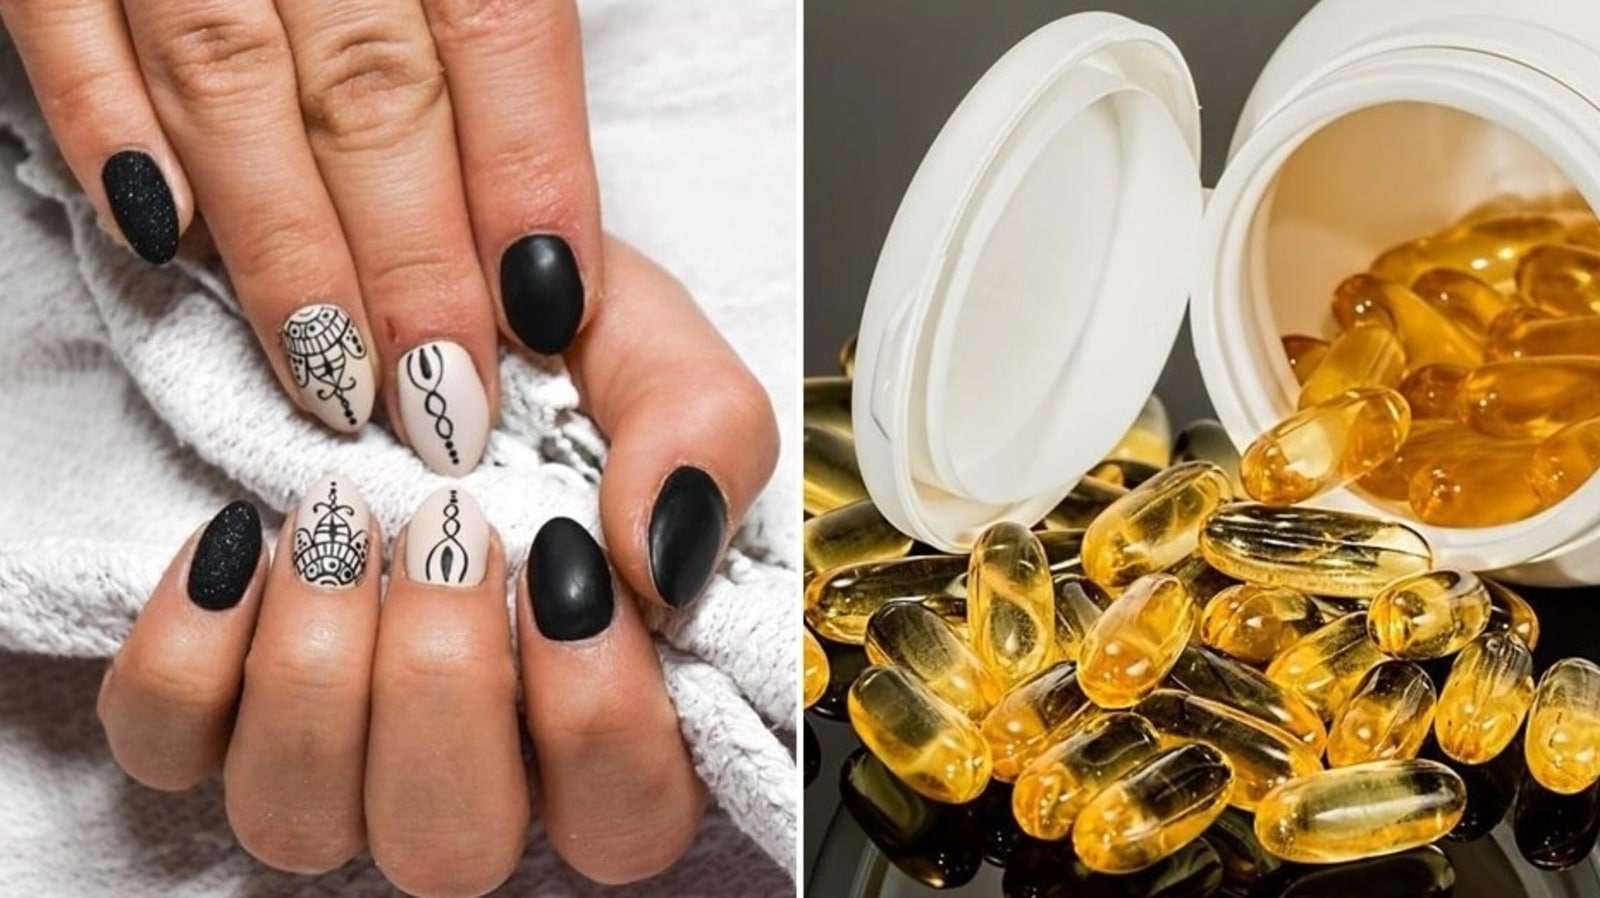 14 Ways to Make Your Nails Grow Faster, According to Derms